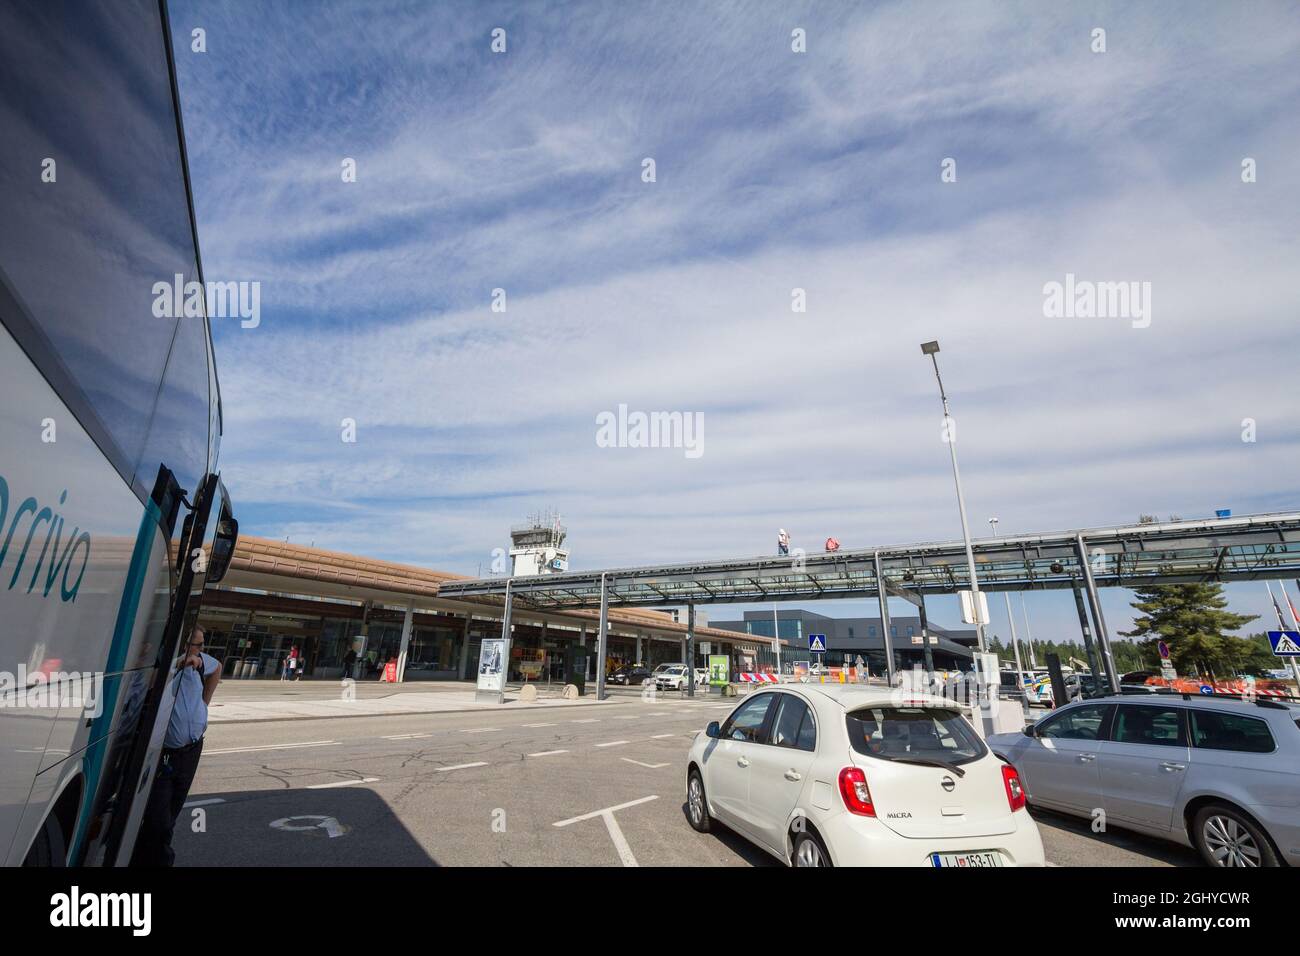 Picture of Joze Pucnik Ljubljana airport seen from bus station in  Ljubljana, Slovenia. Ljubljana Joze Pucnik Airport, also known by its  previous name Stock Photo - Alamy